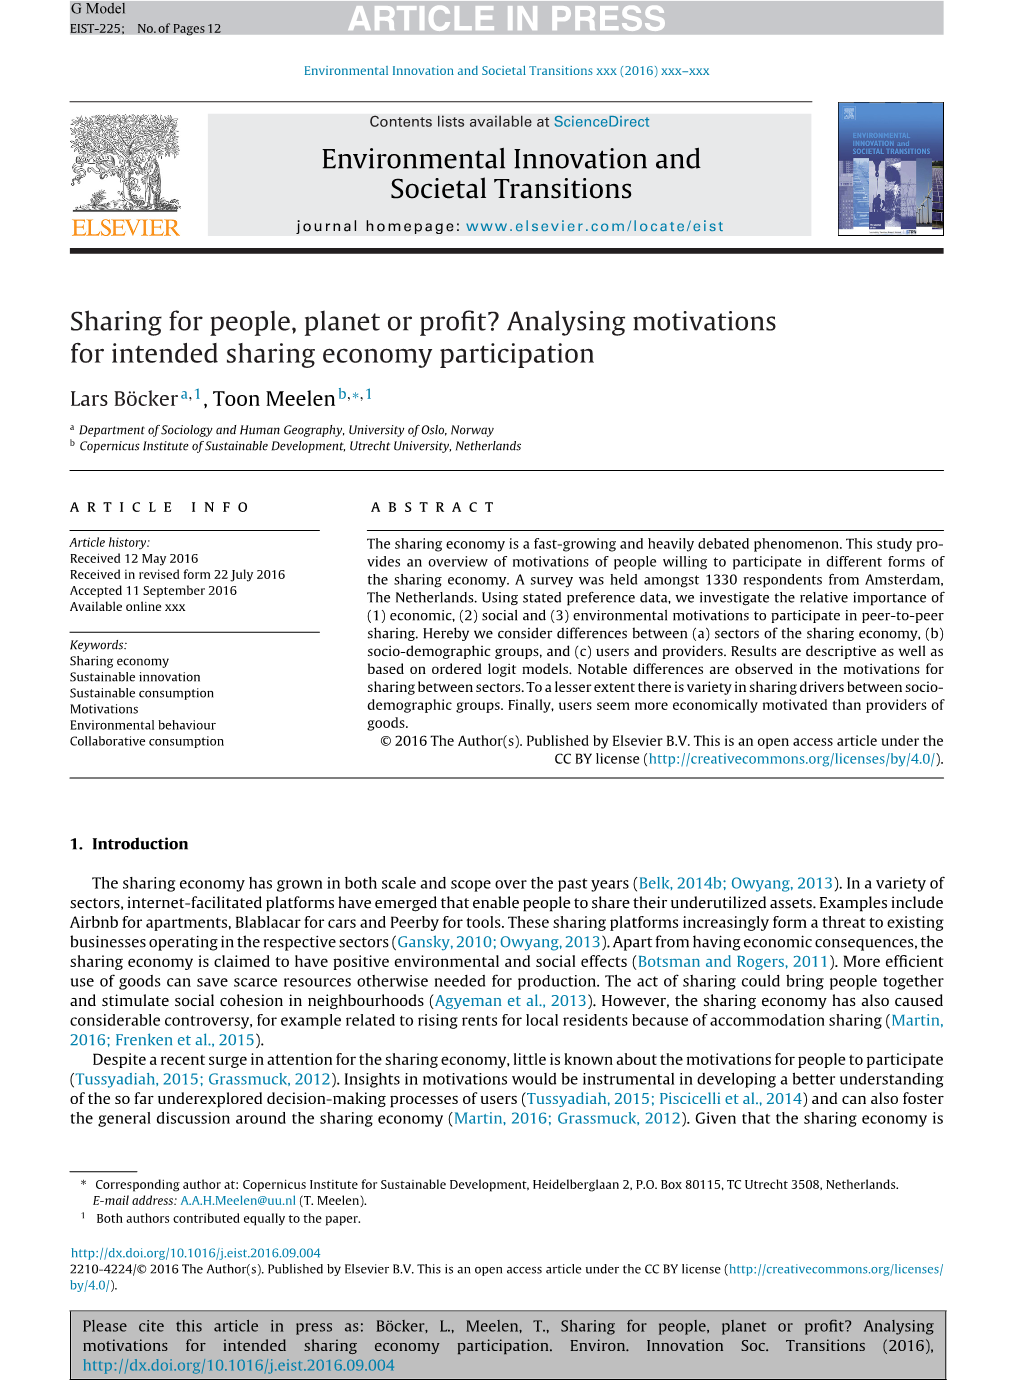 Analysing Motivations for Intended Sharing Economy Participation